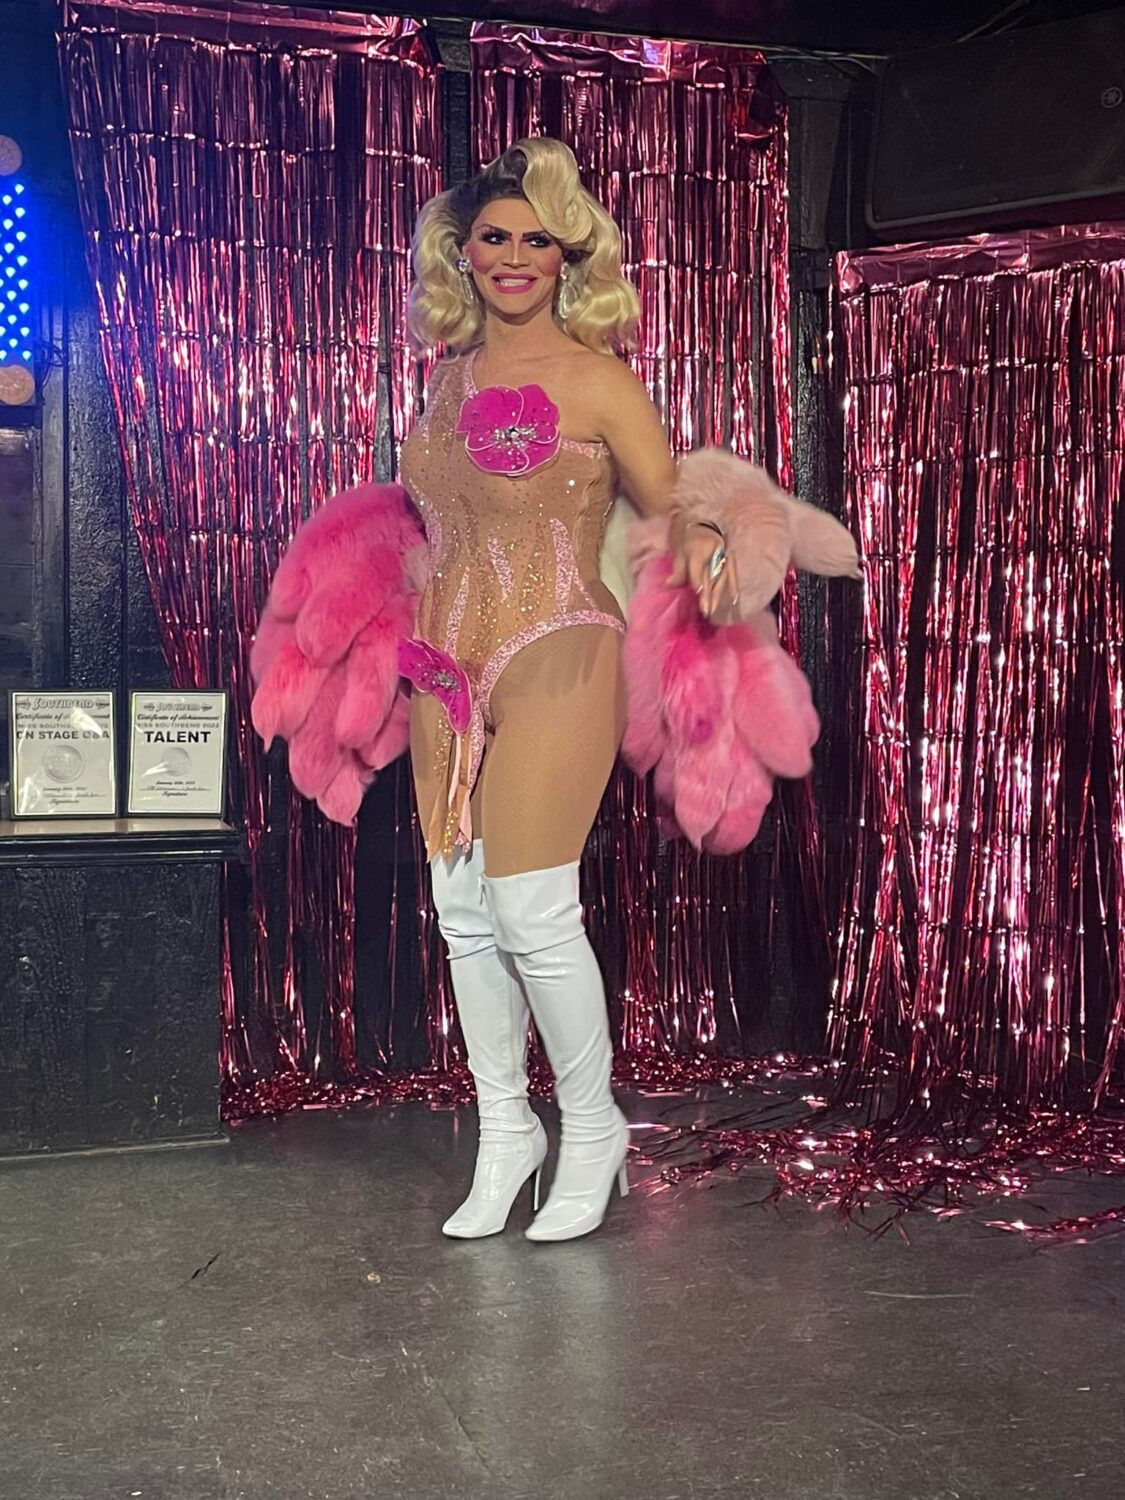 Ava Aurora Foxx | Miss Southbend Pageant | Southbend Tavern (Columbus, Ohio) | 1/30/2022 [Photo by Vintage Blue]